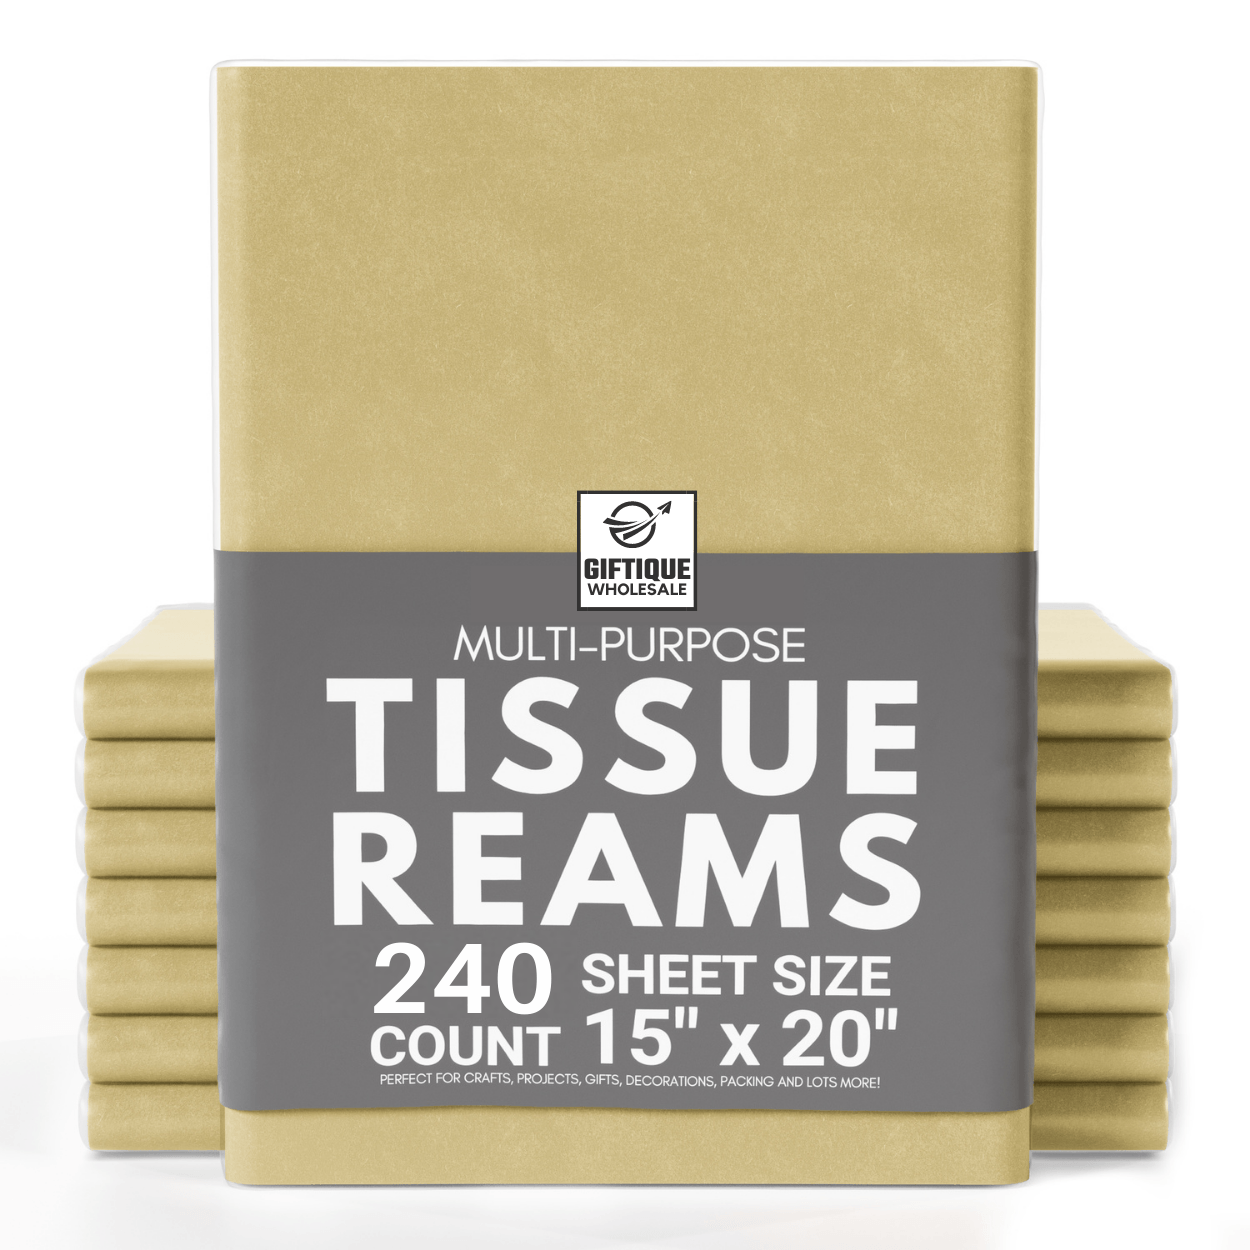 480 Sheets - 15 x 20 Packing Paper Sheets For Gift Wrapping And Packing,  Bulk Tissue Paper Ream - Dark Blue